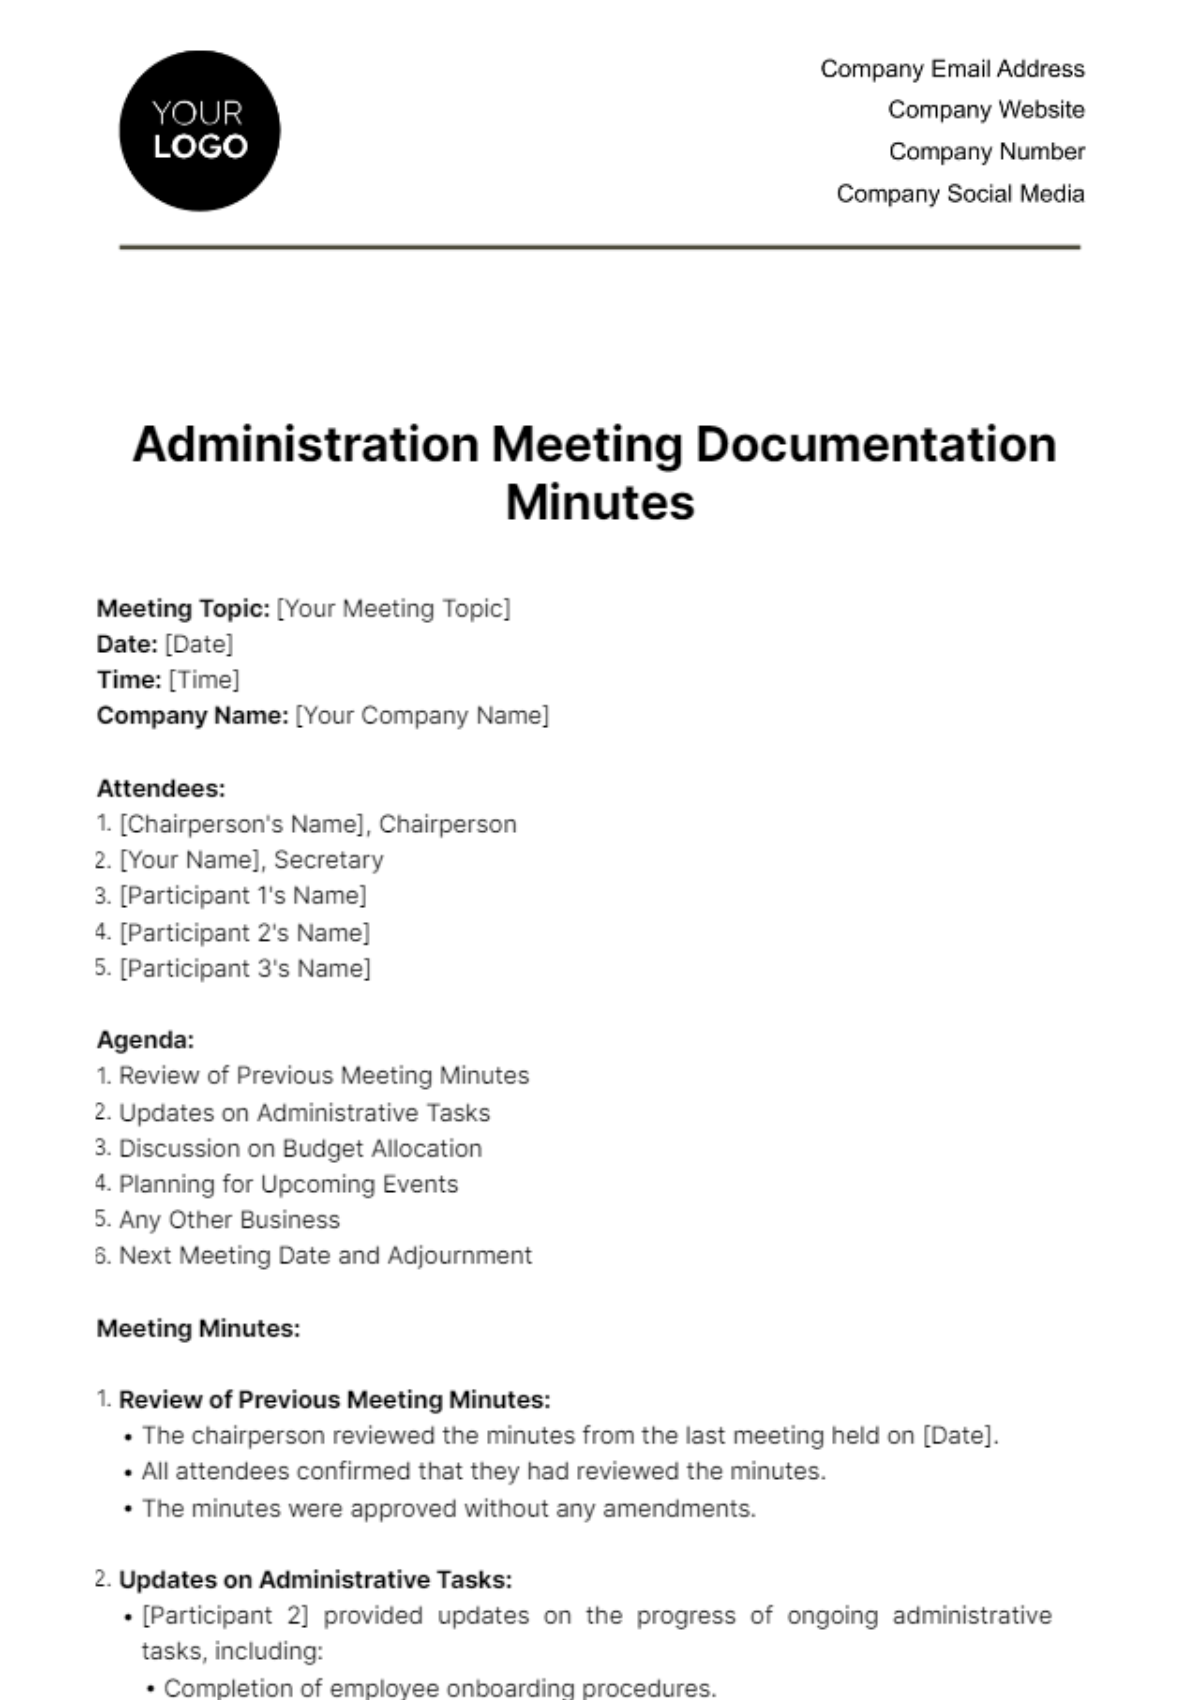 Administration Meeting Documentation Minute Template